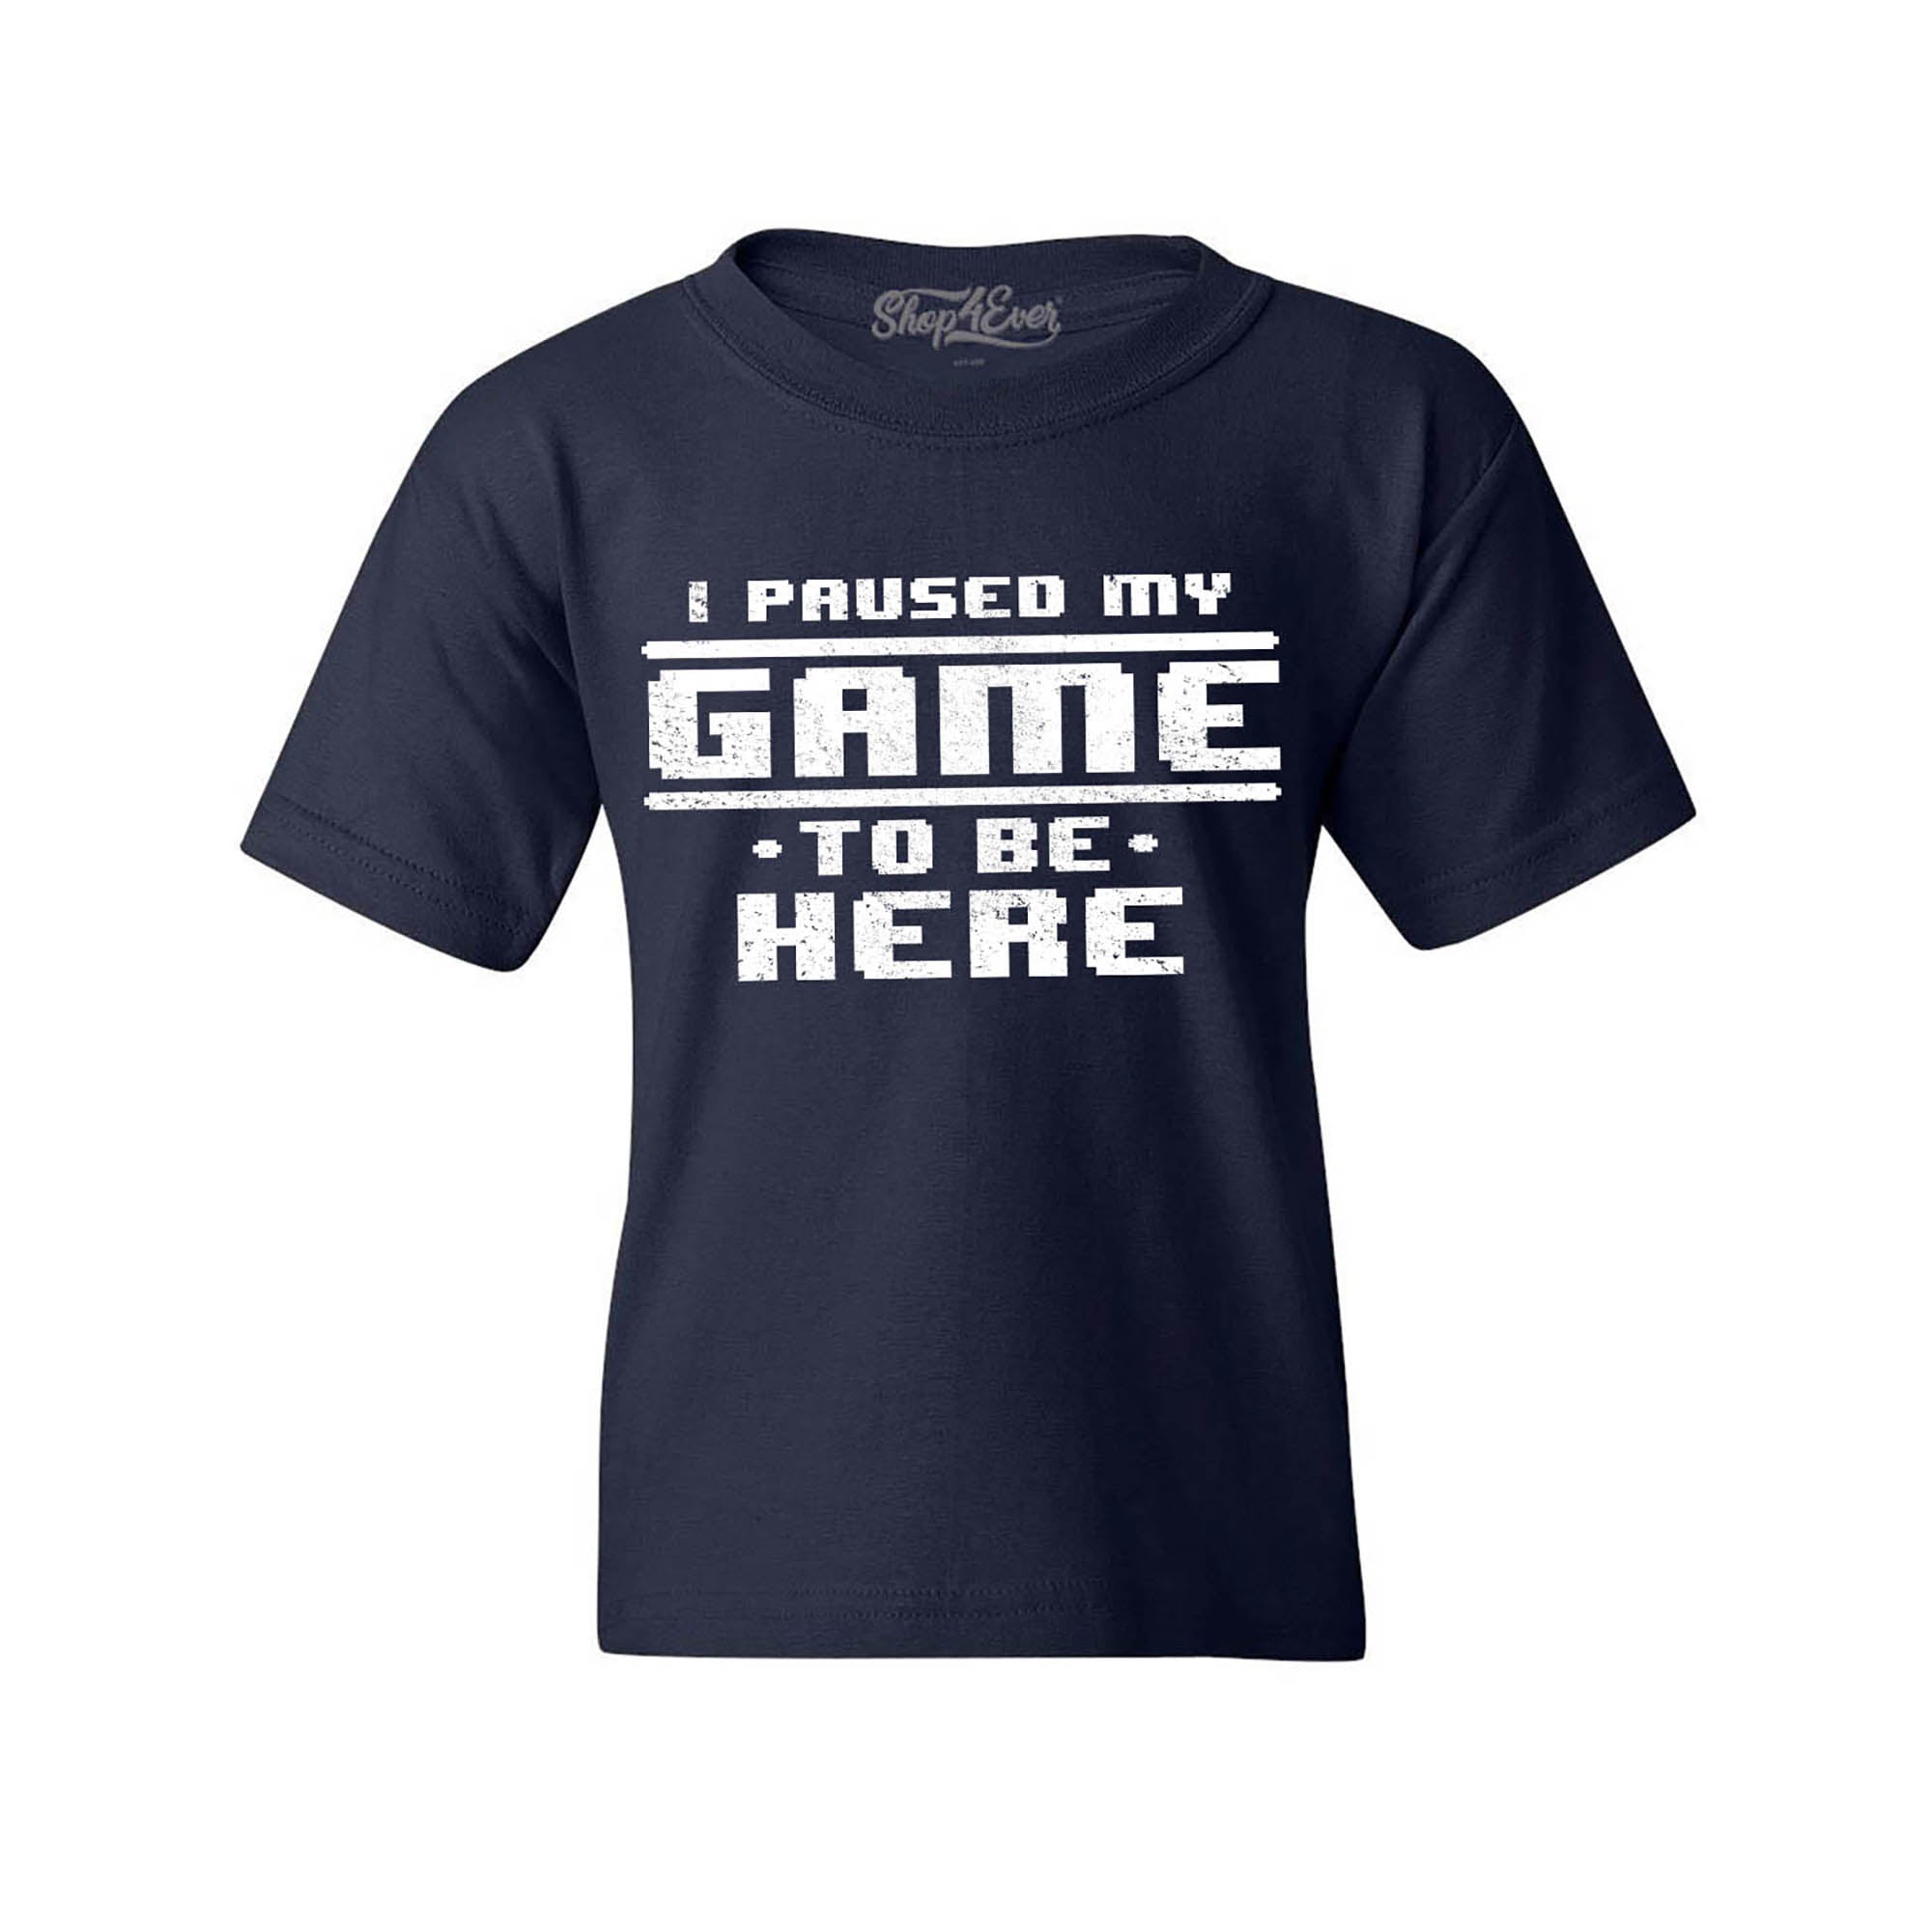 I Paused My Game to be Here Kids Child Gamer Youth's T-Shirt